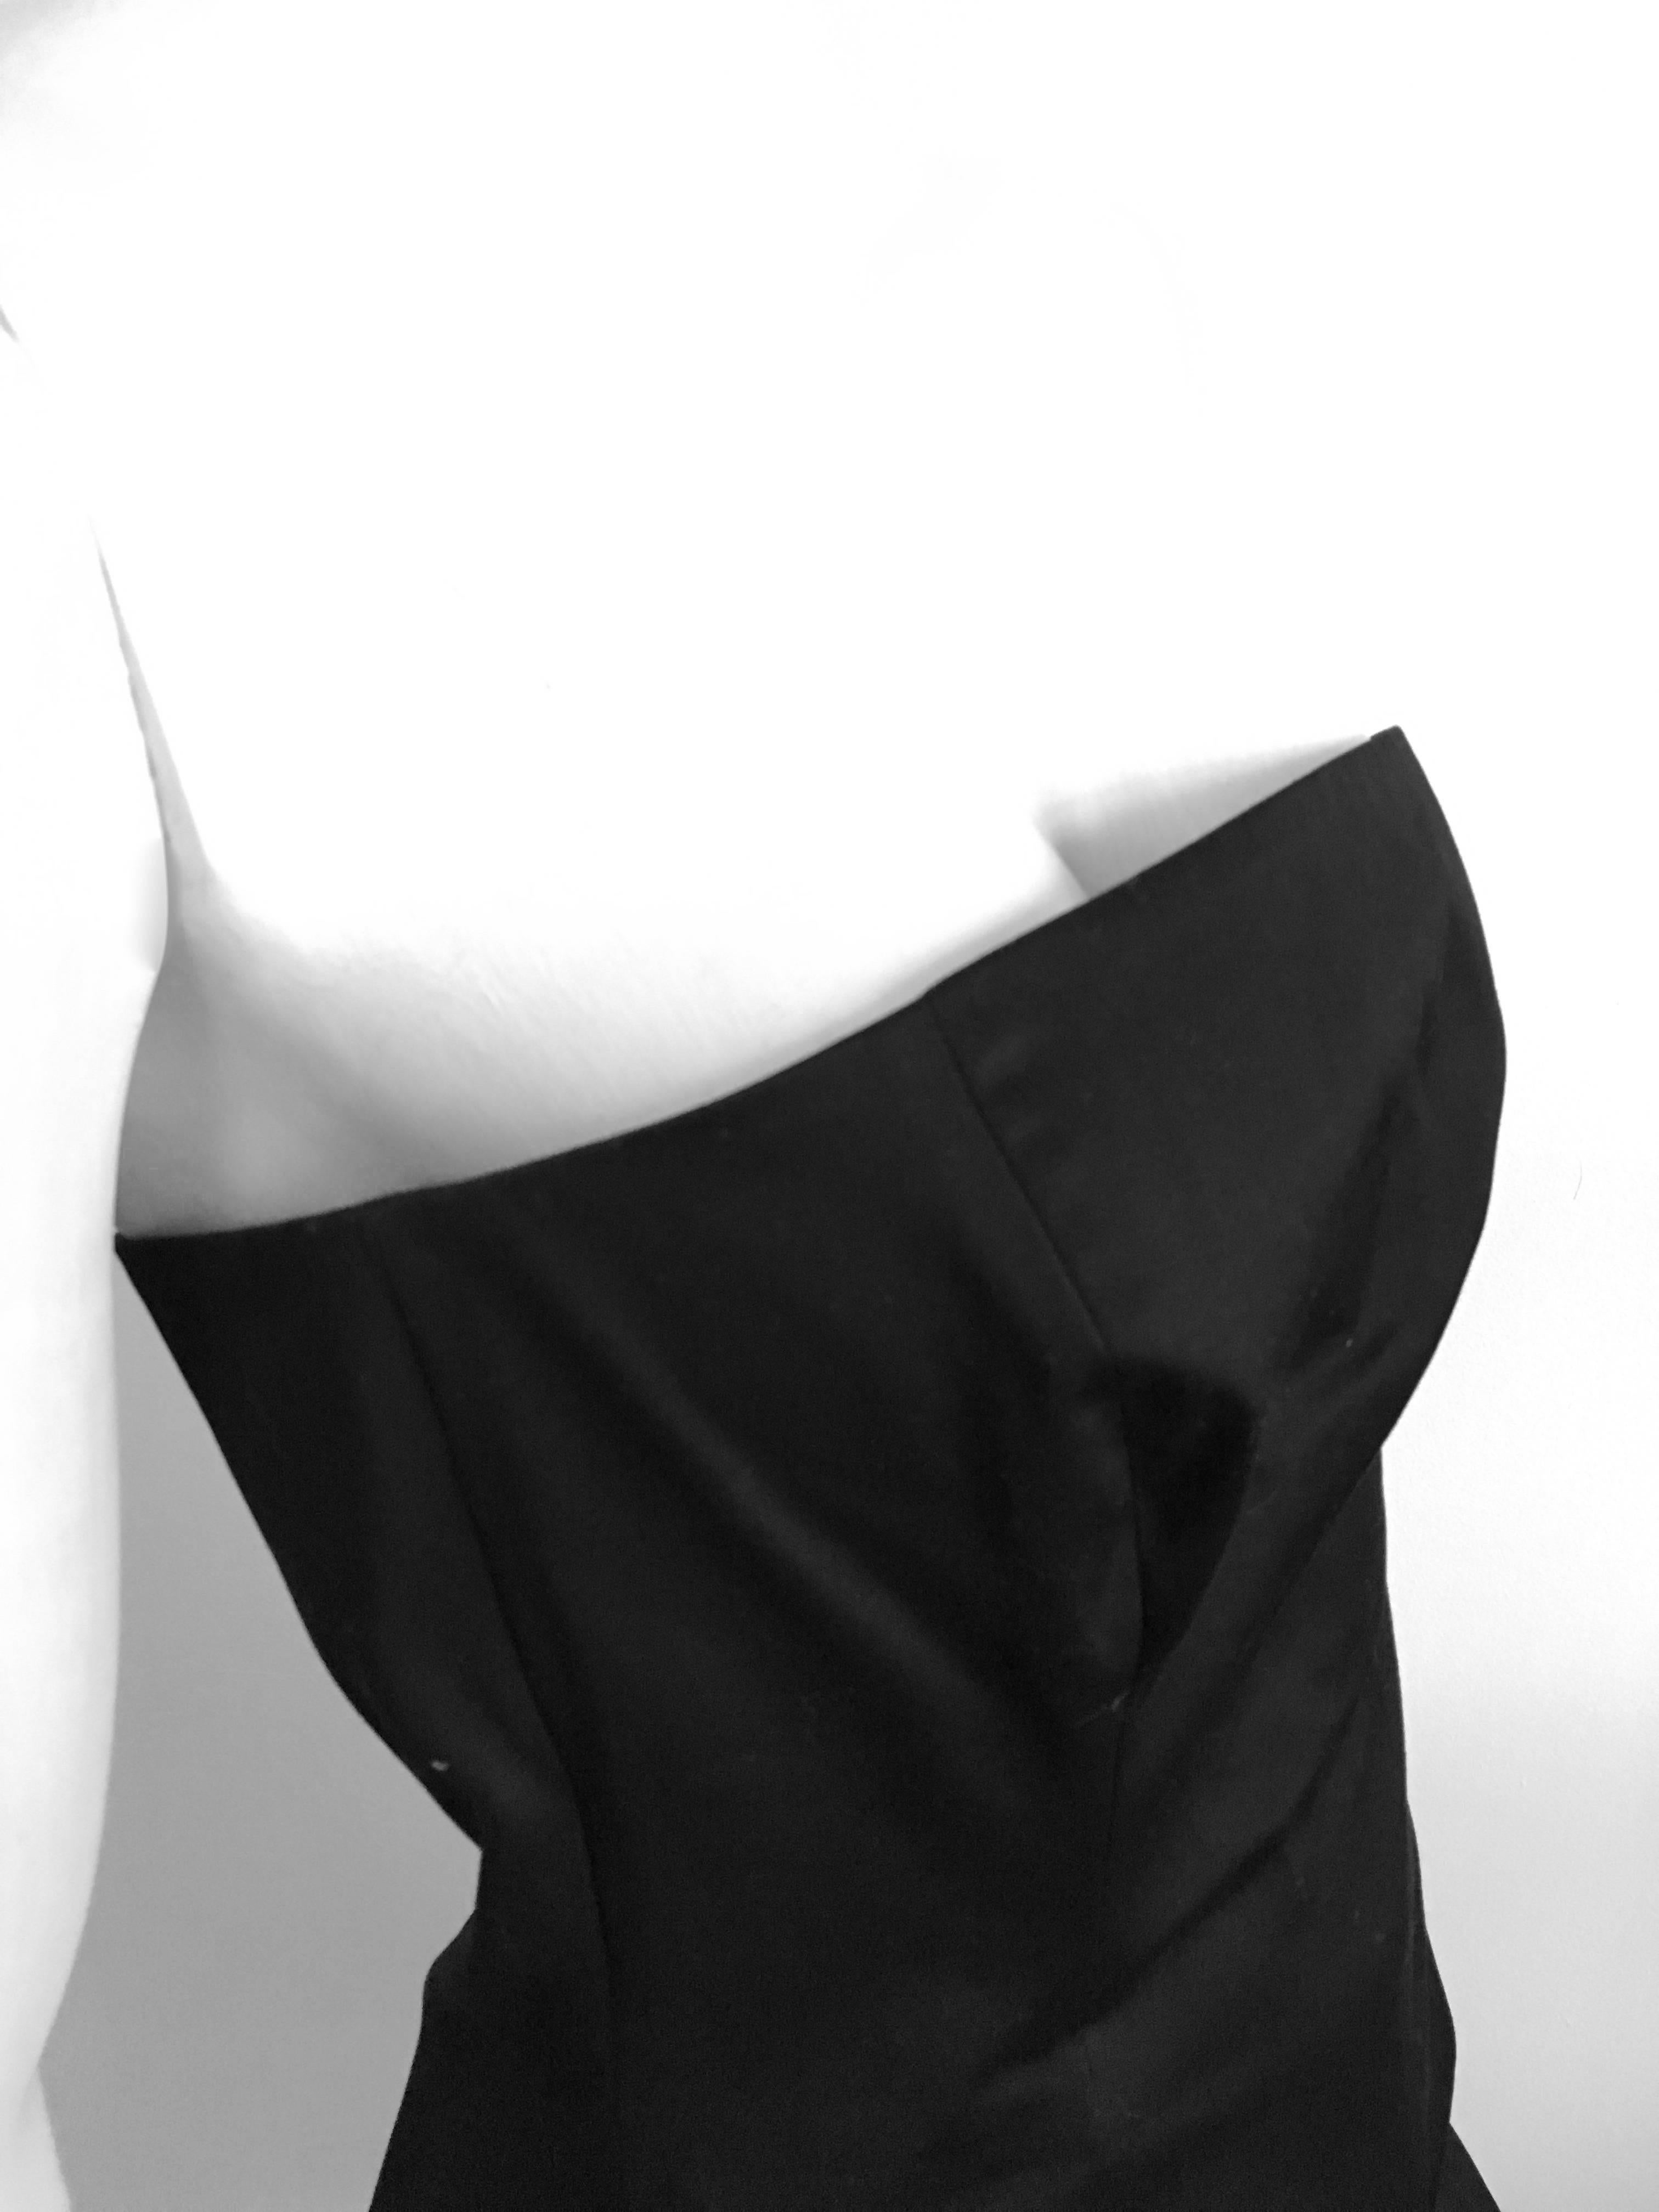 Michael Kors Strapless Cotton Black Cocktail Dress Size 4 / 6. Made in Italy. For Sale 4